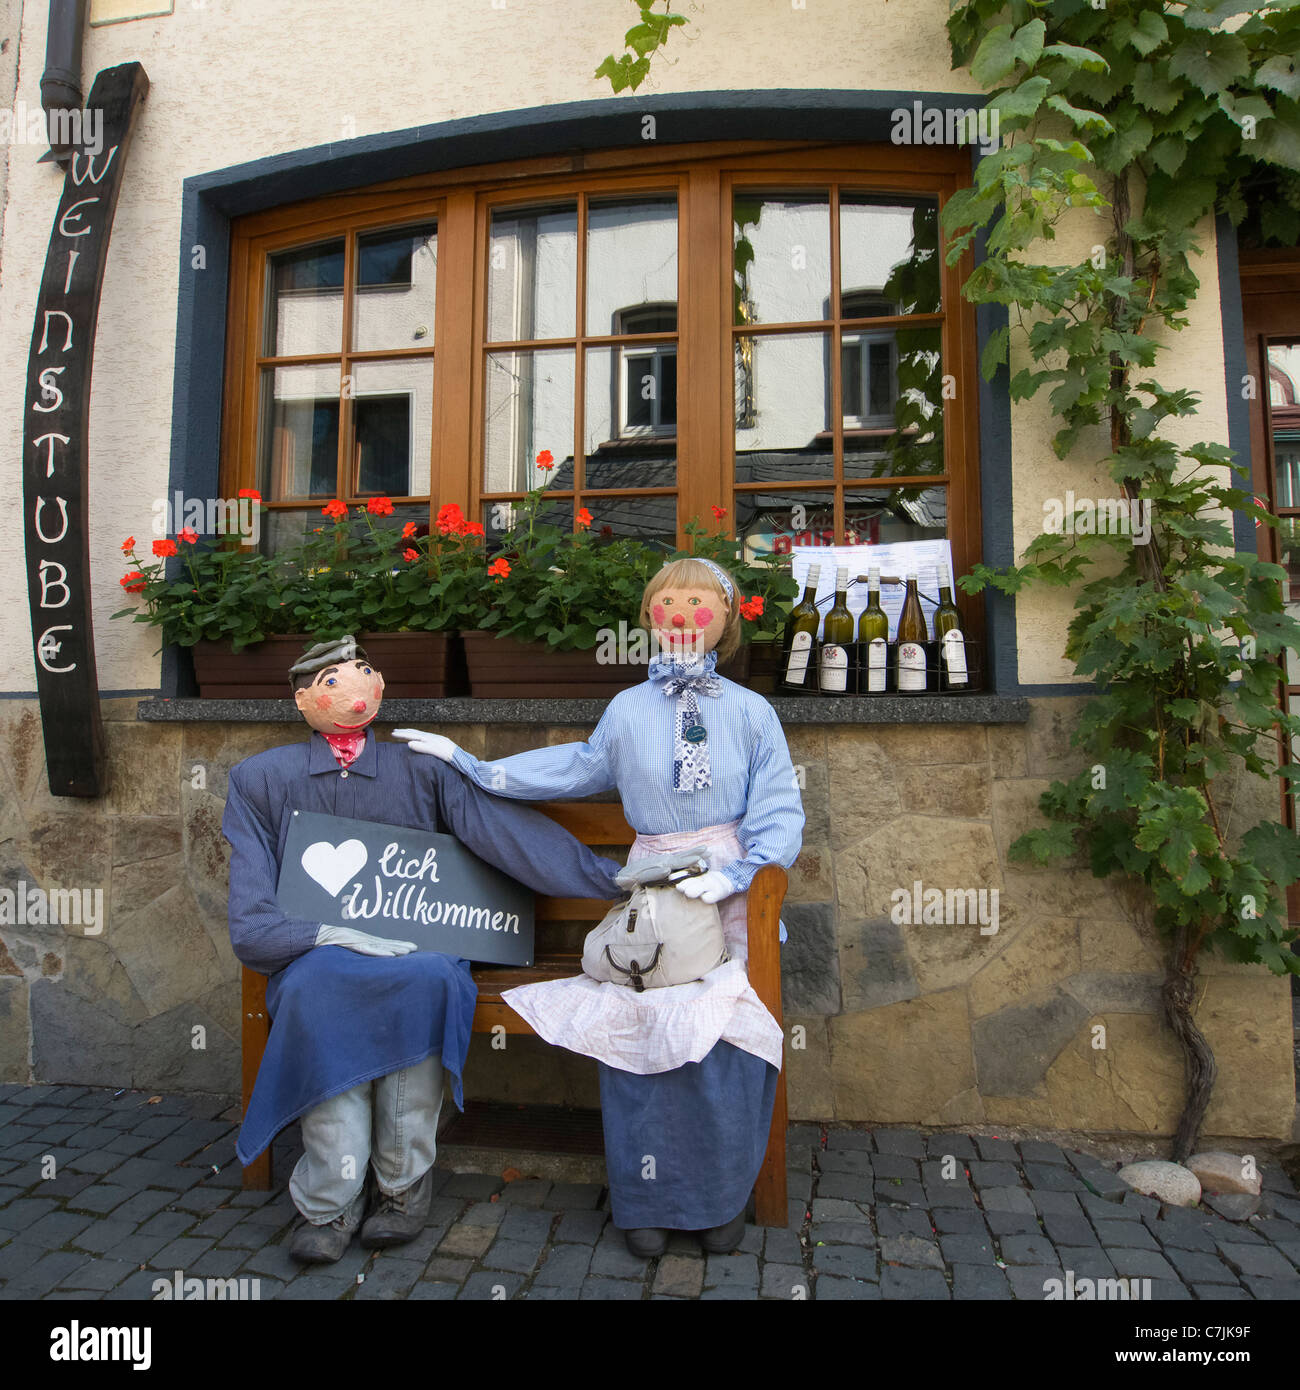 Scene outside wine shop in historic town of Bacharach on River Rhine in Rhineland Germany Stock Photo